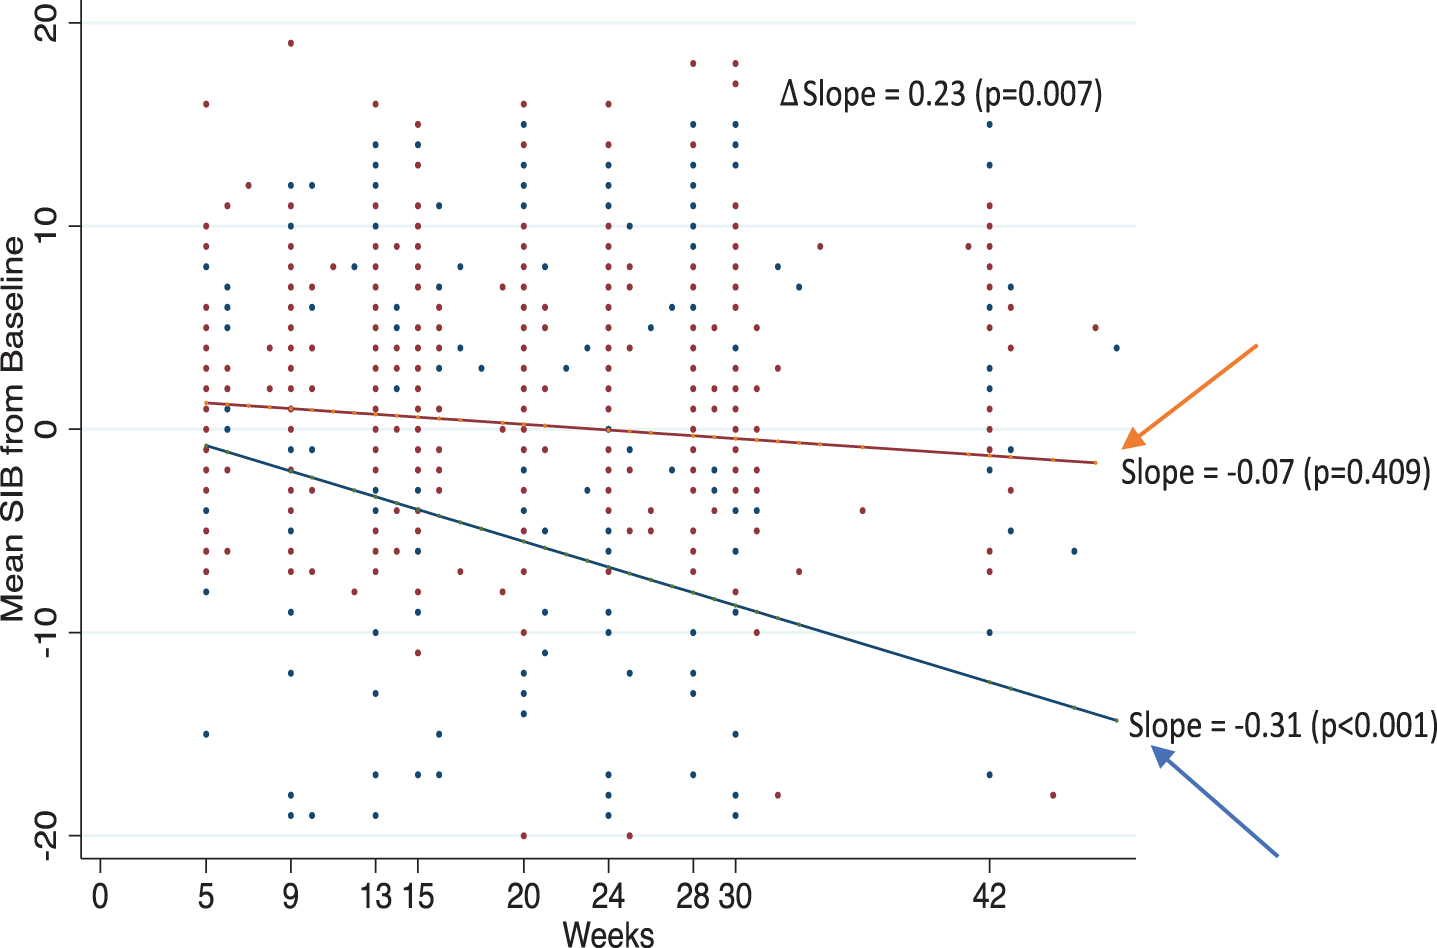 Trend analyses. Estimate slopes over time in mean SIB from baseline for Bryostatin (red) and placebo (blue) with actual data points given for patients in the Moderately Severe 10-14 Cohort. Twenty-five SIB values< -20 are not shown in the plot but were included in the trend analysis.